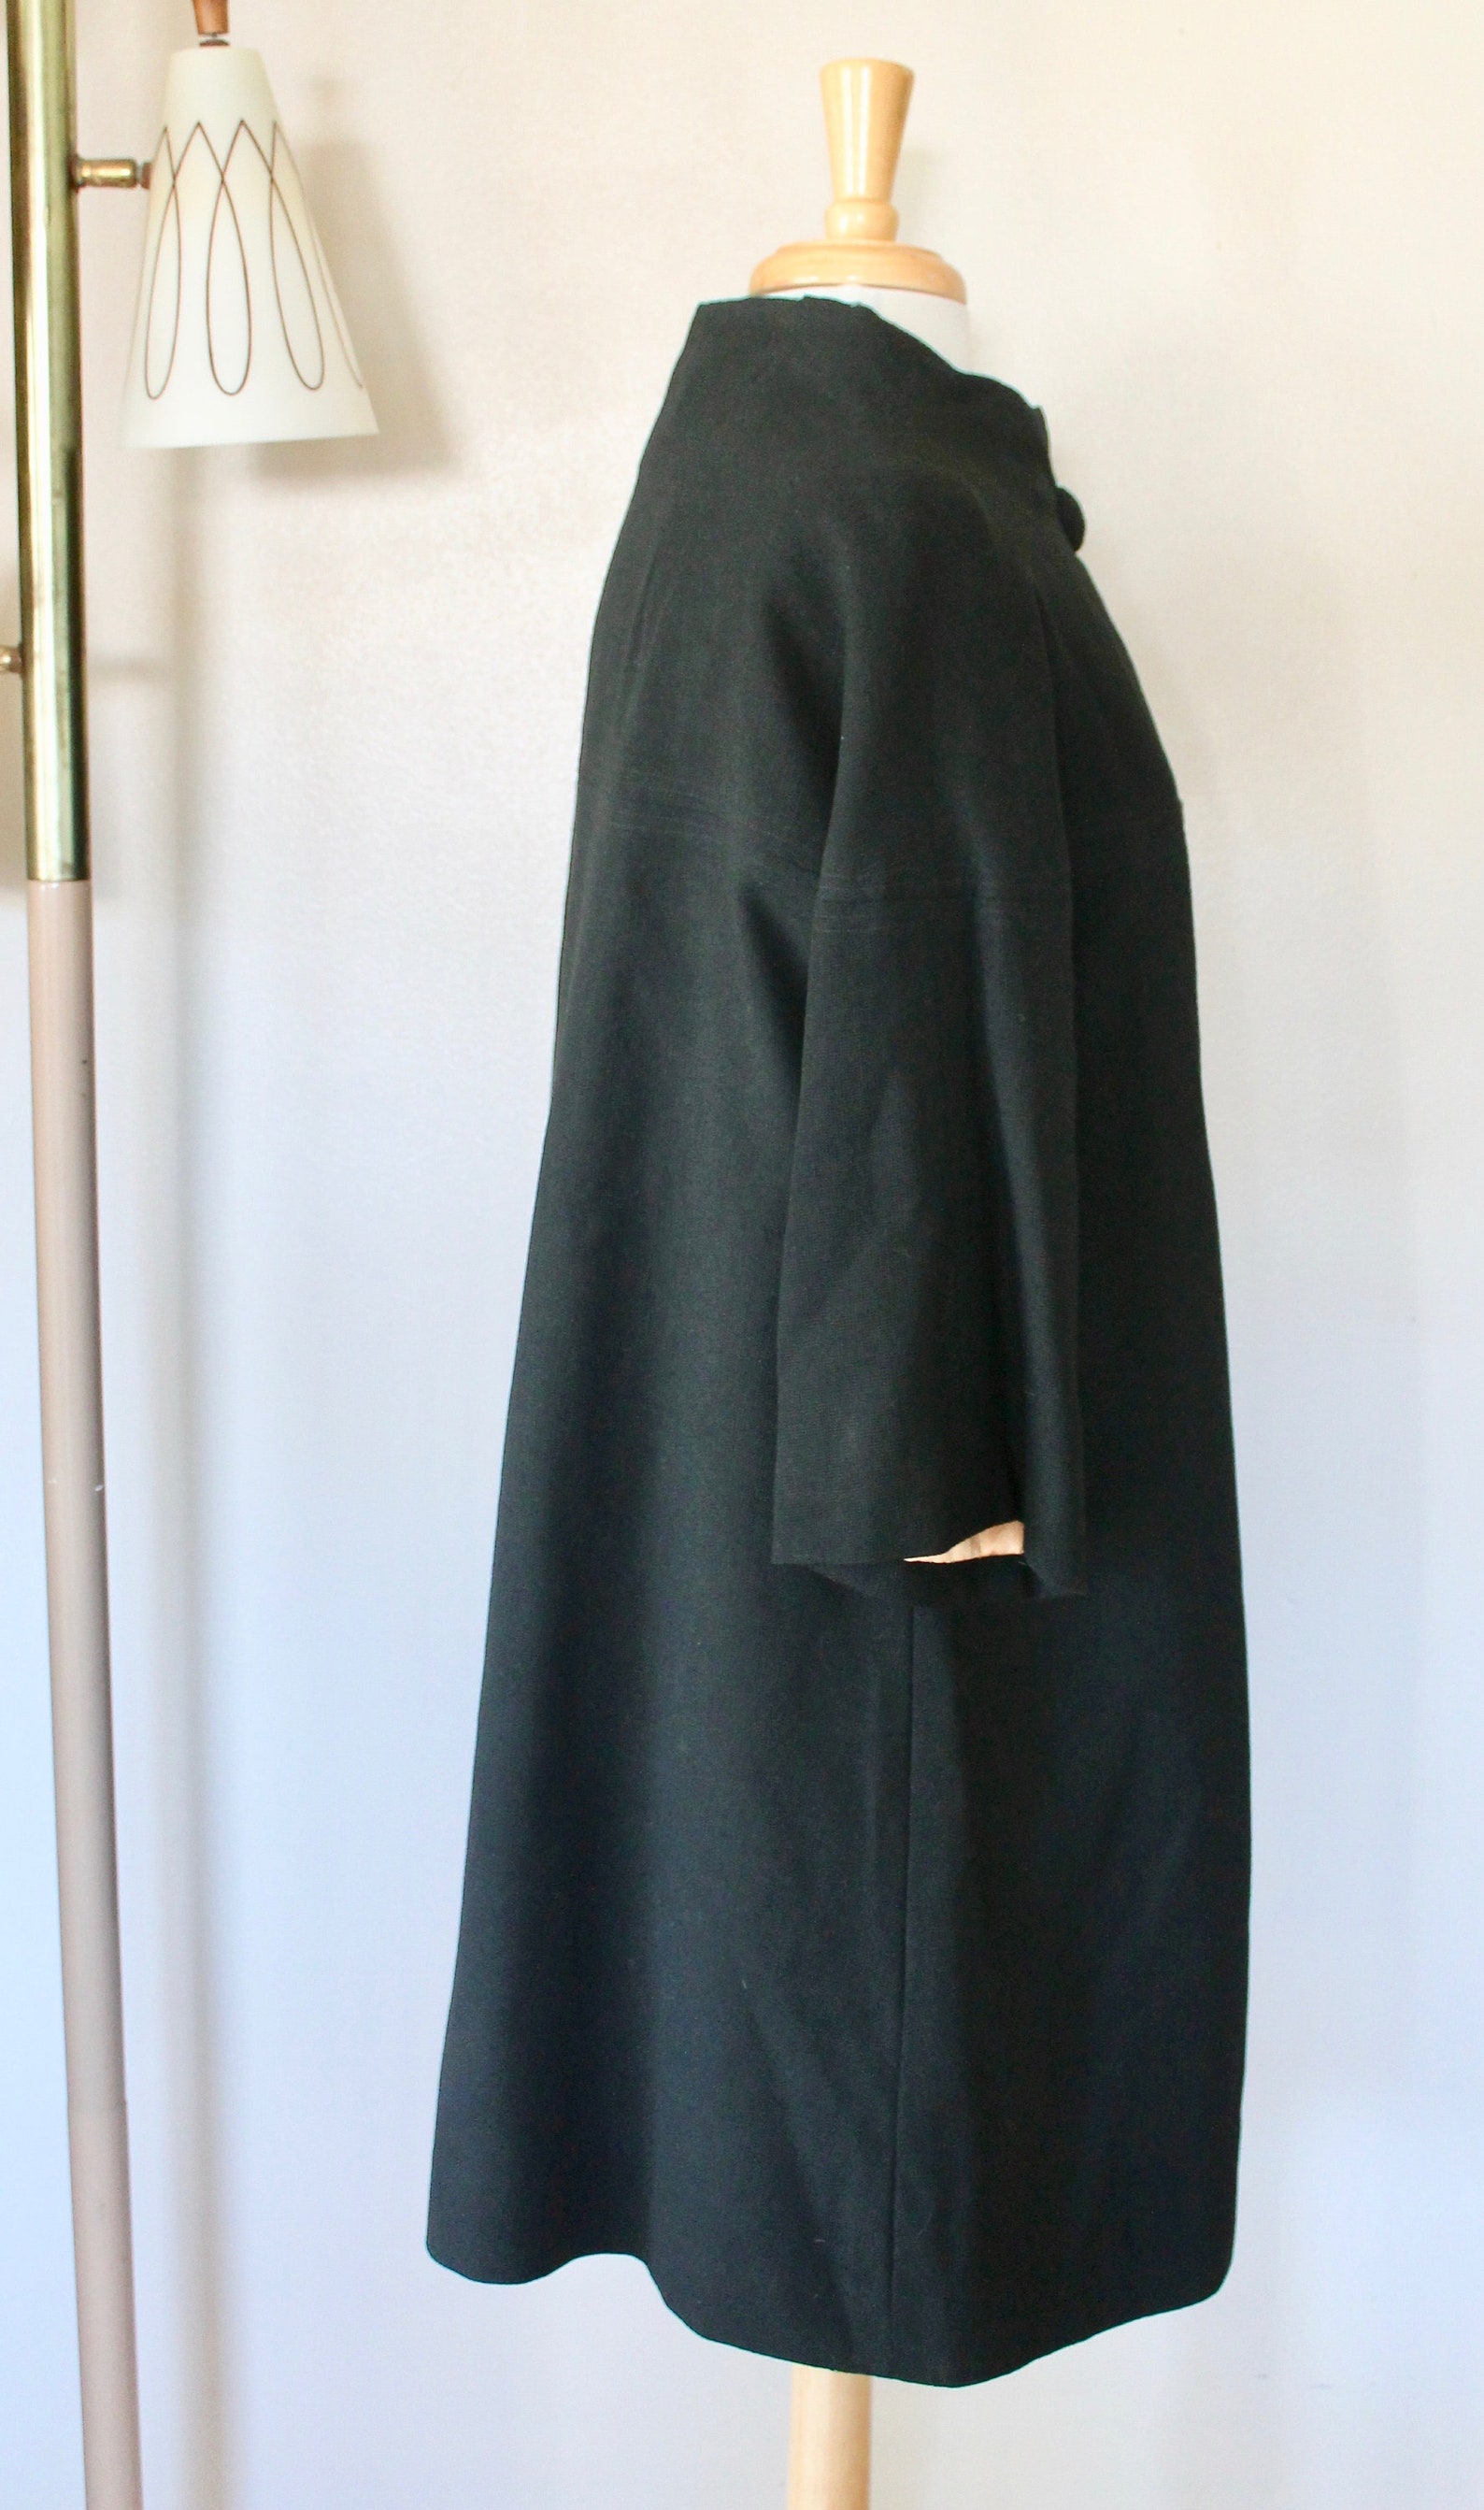 1950s/1960s Black Button Front Funnel Neck Swing Coat Size | Etsy